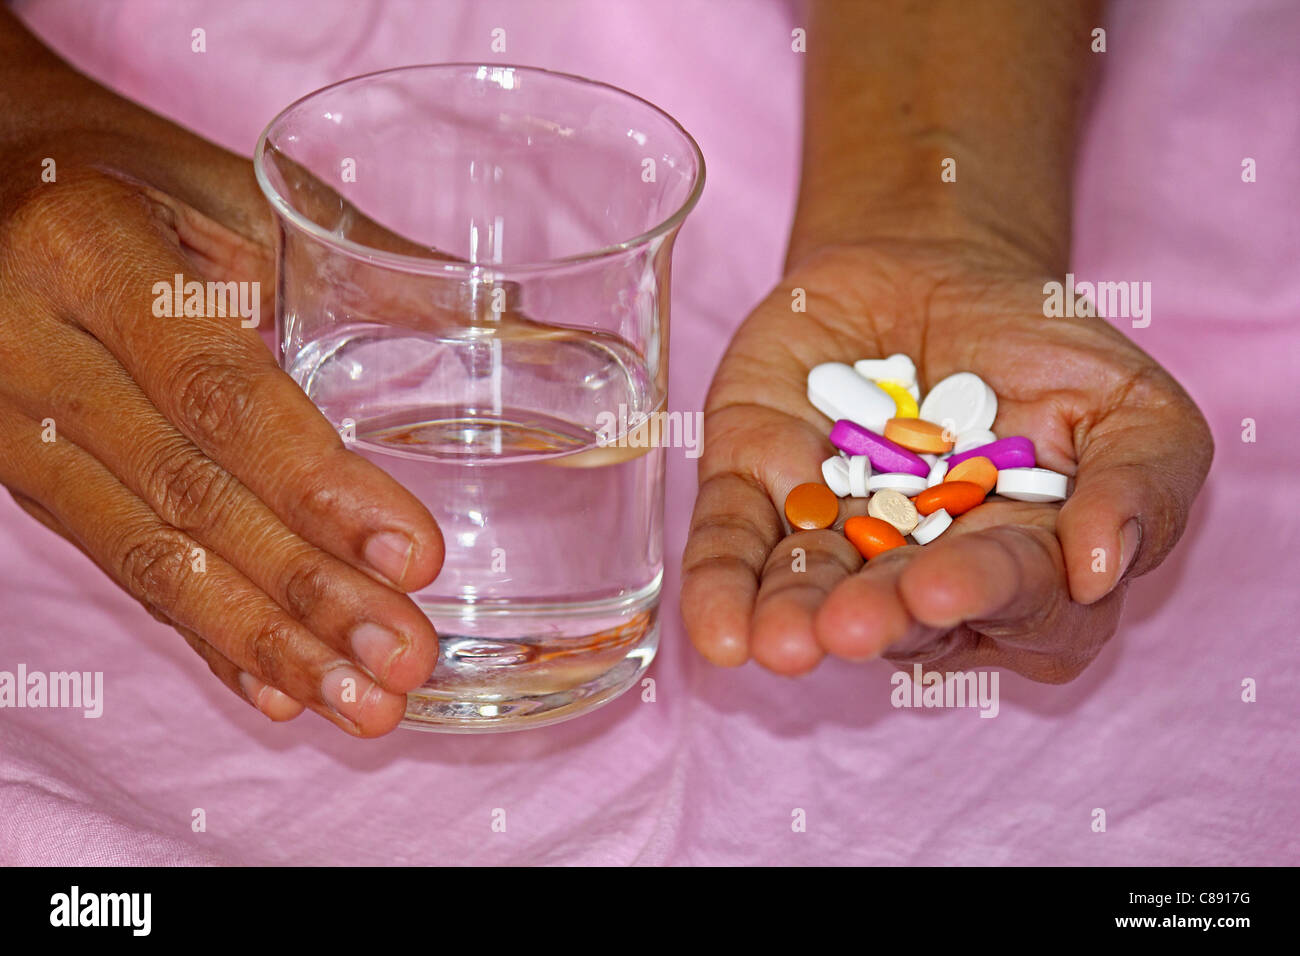 Pills with Water Glass in Human Hand Stock Photo